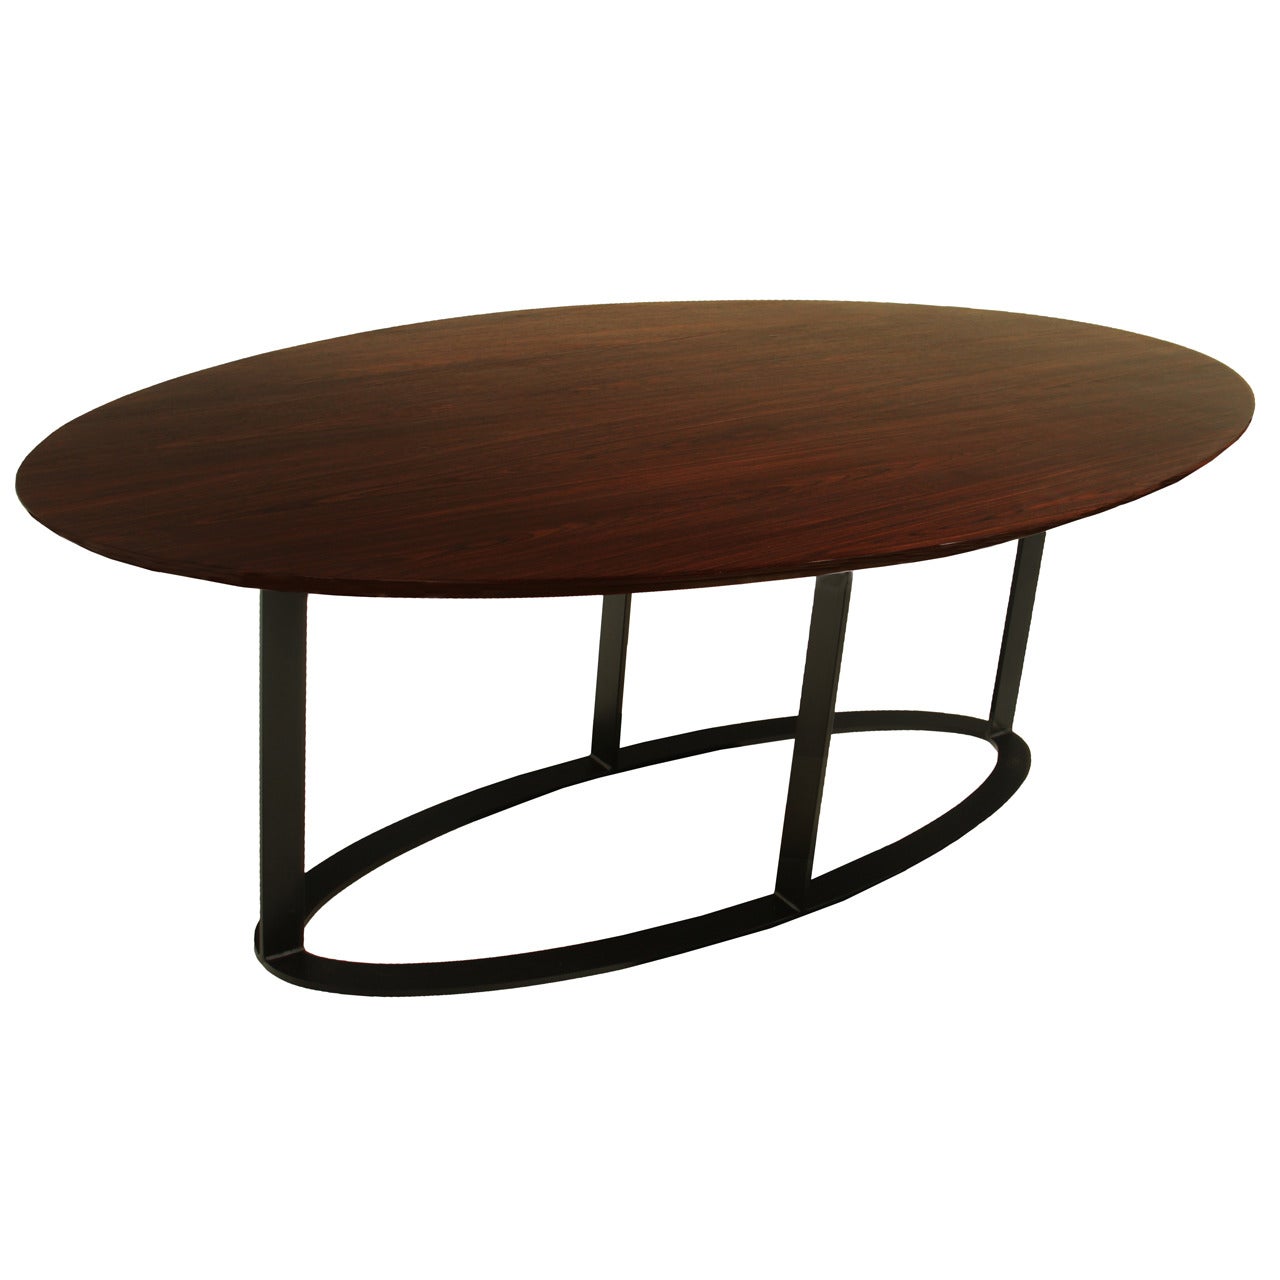 Vintage Oval Rosewood Dining Table from Brazil For Sale